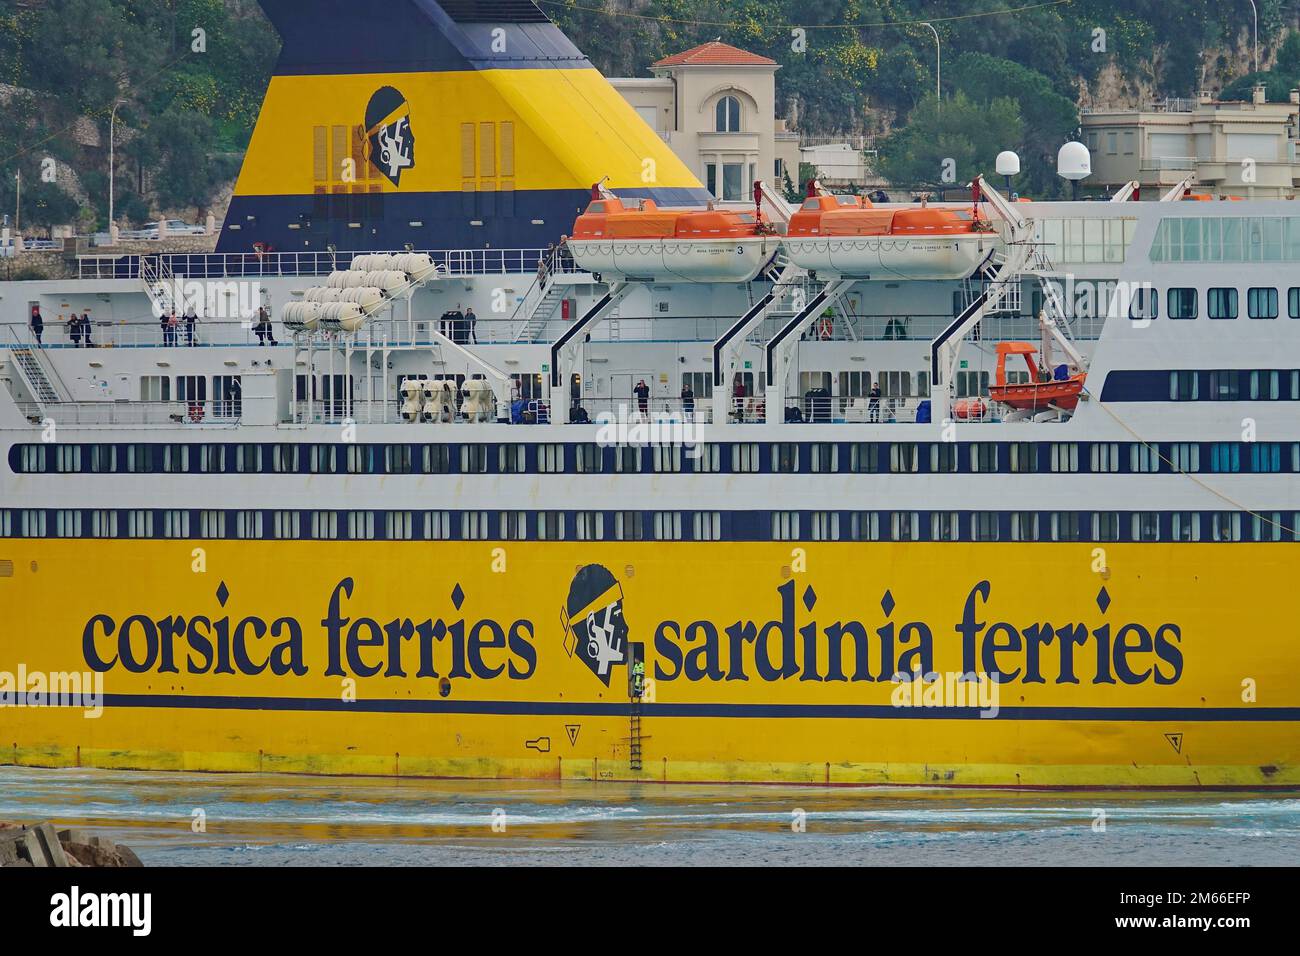 View of a yellow ferryboat Corsica Sardinia Ferries in the Port of Nice harbor. Nice, France - December 2022 Stock Photo